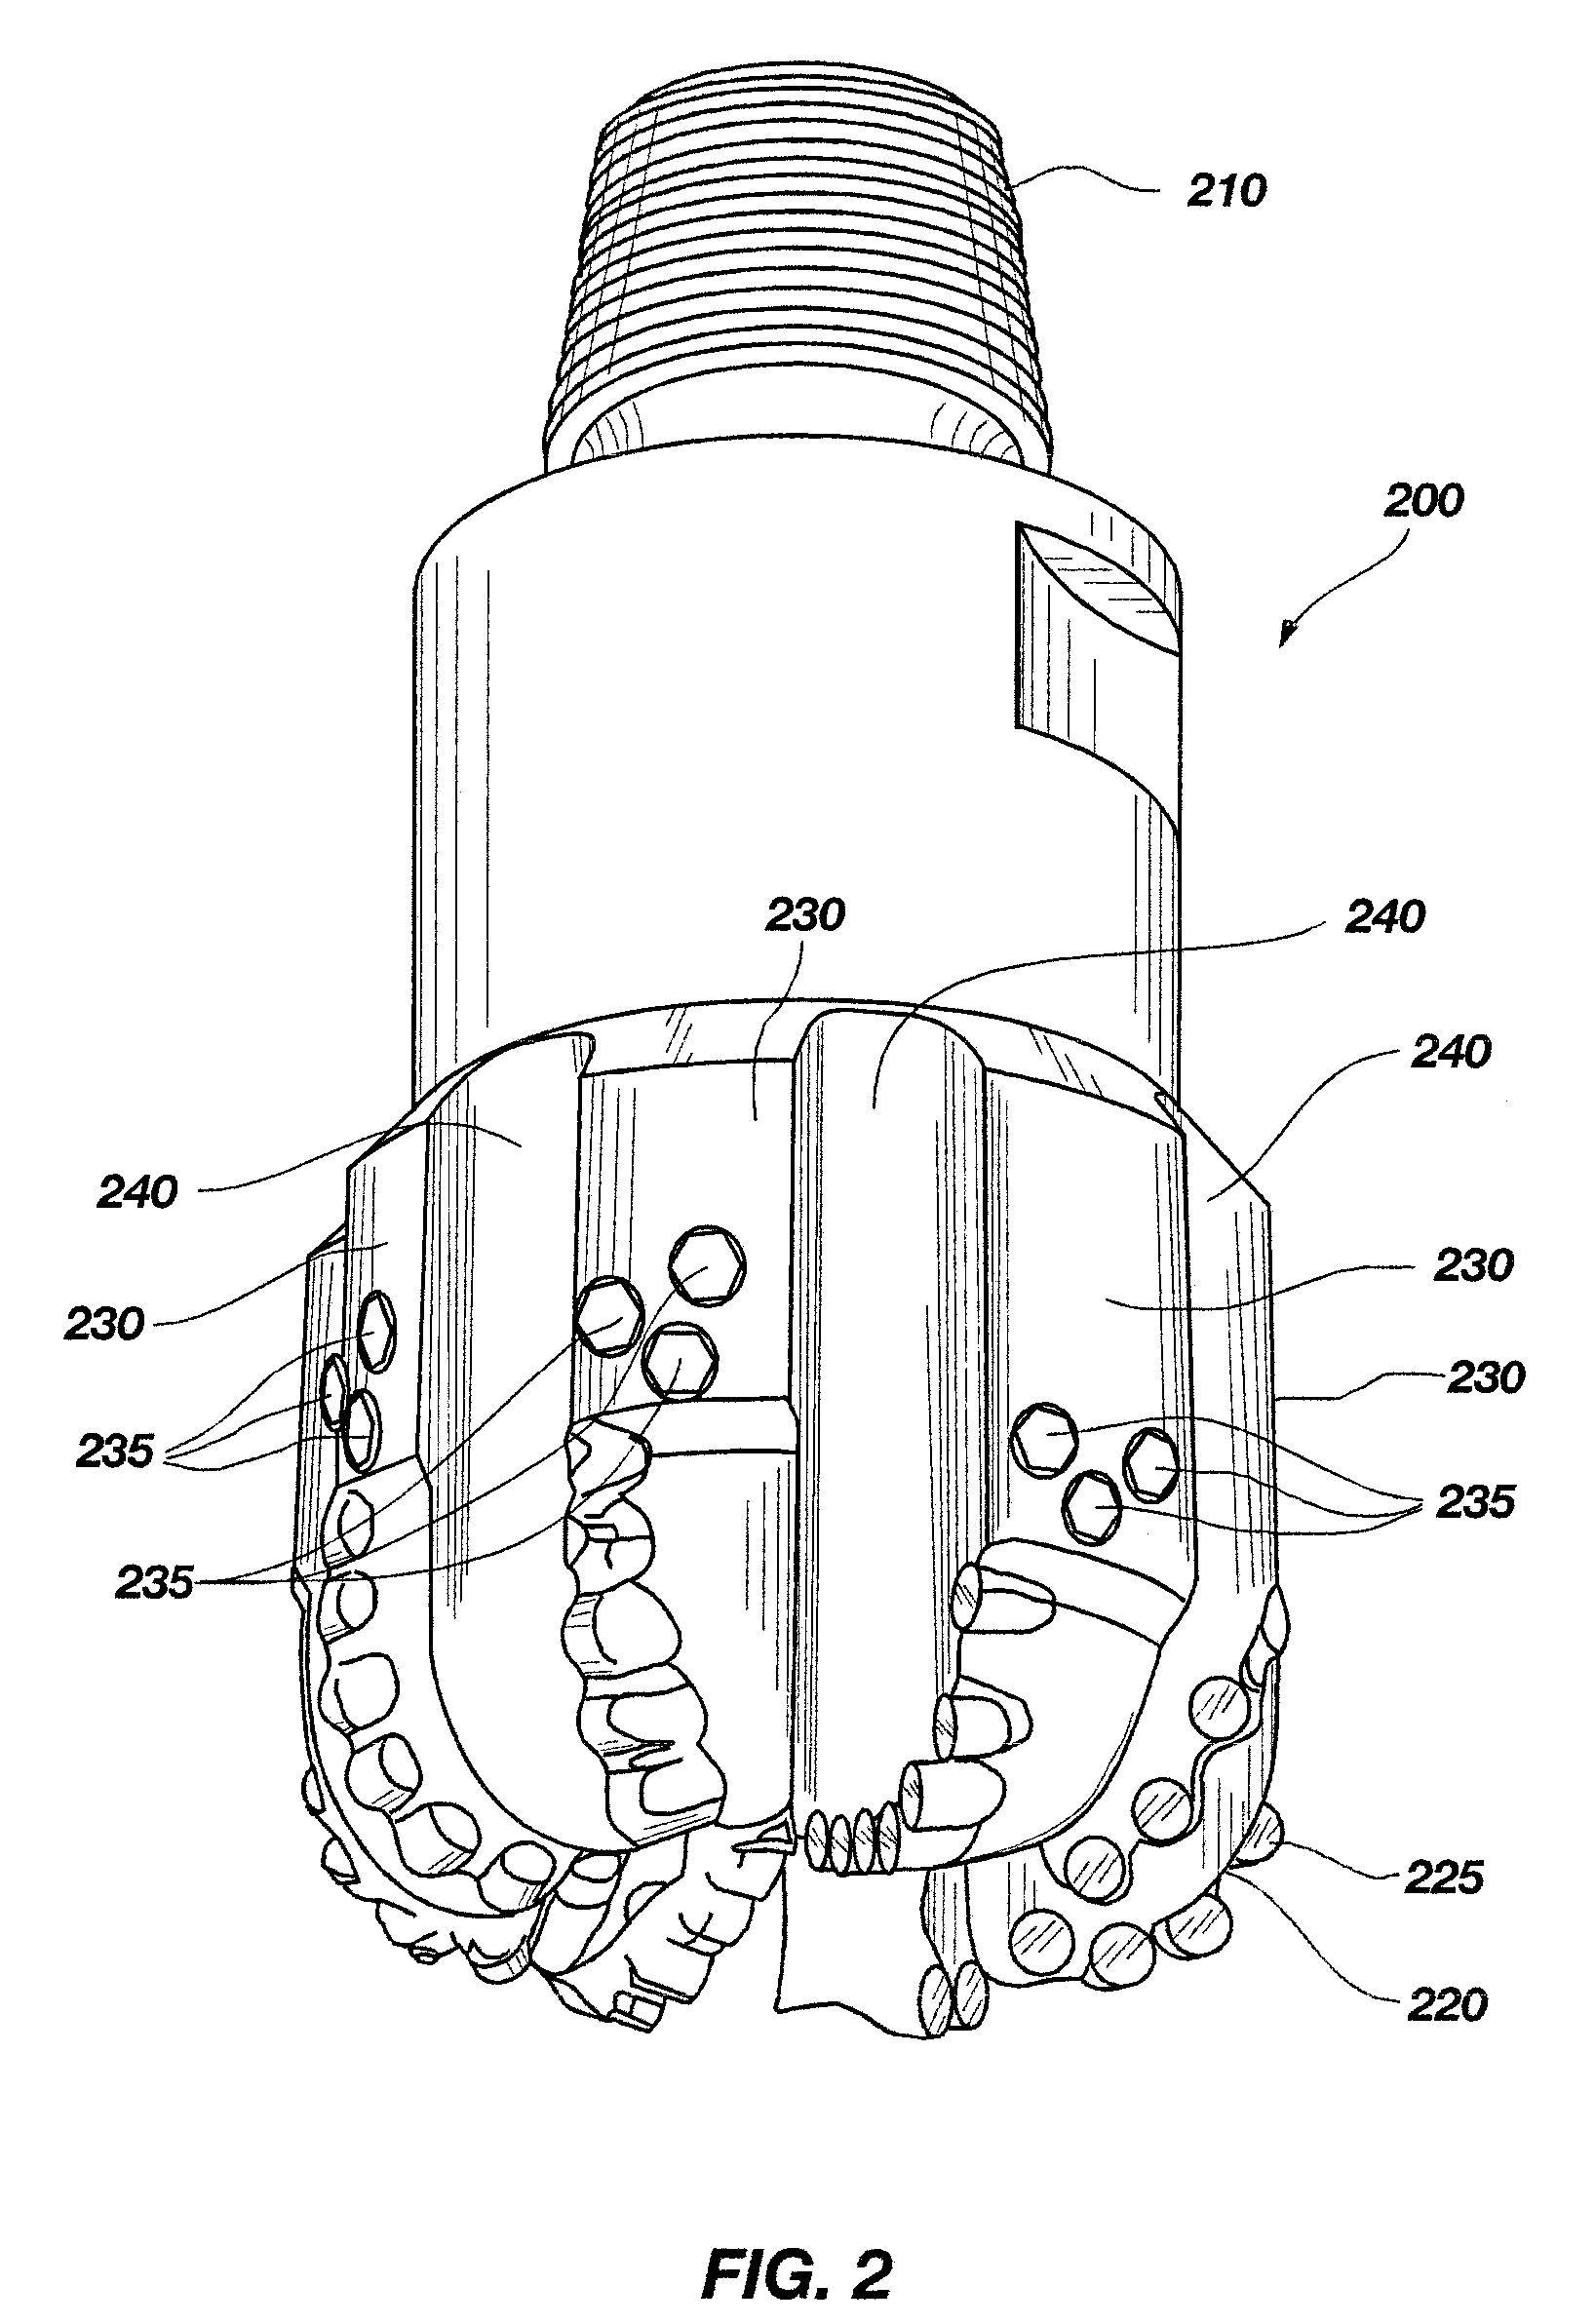 Method and apparatus for collecting drill bit performance data